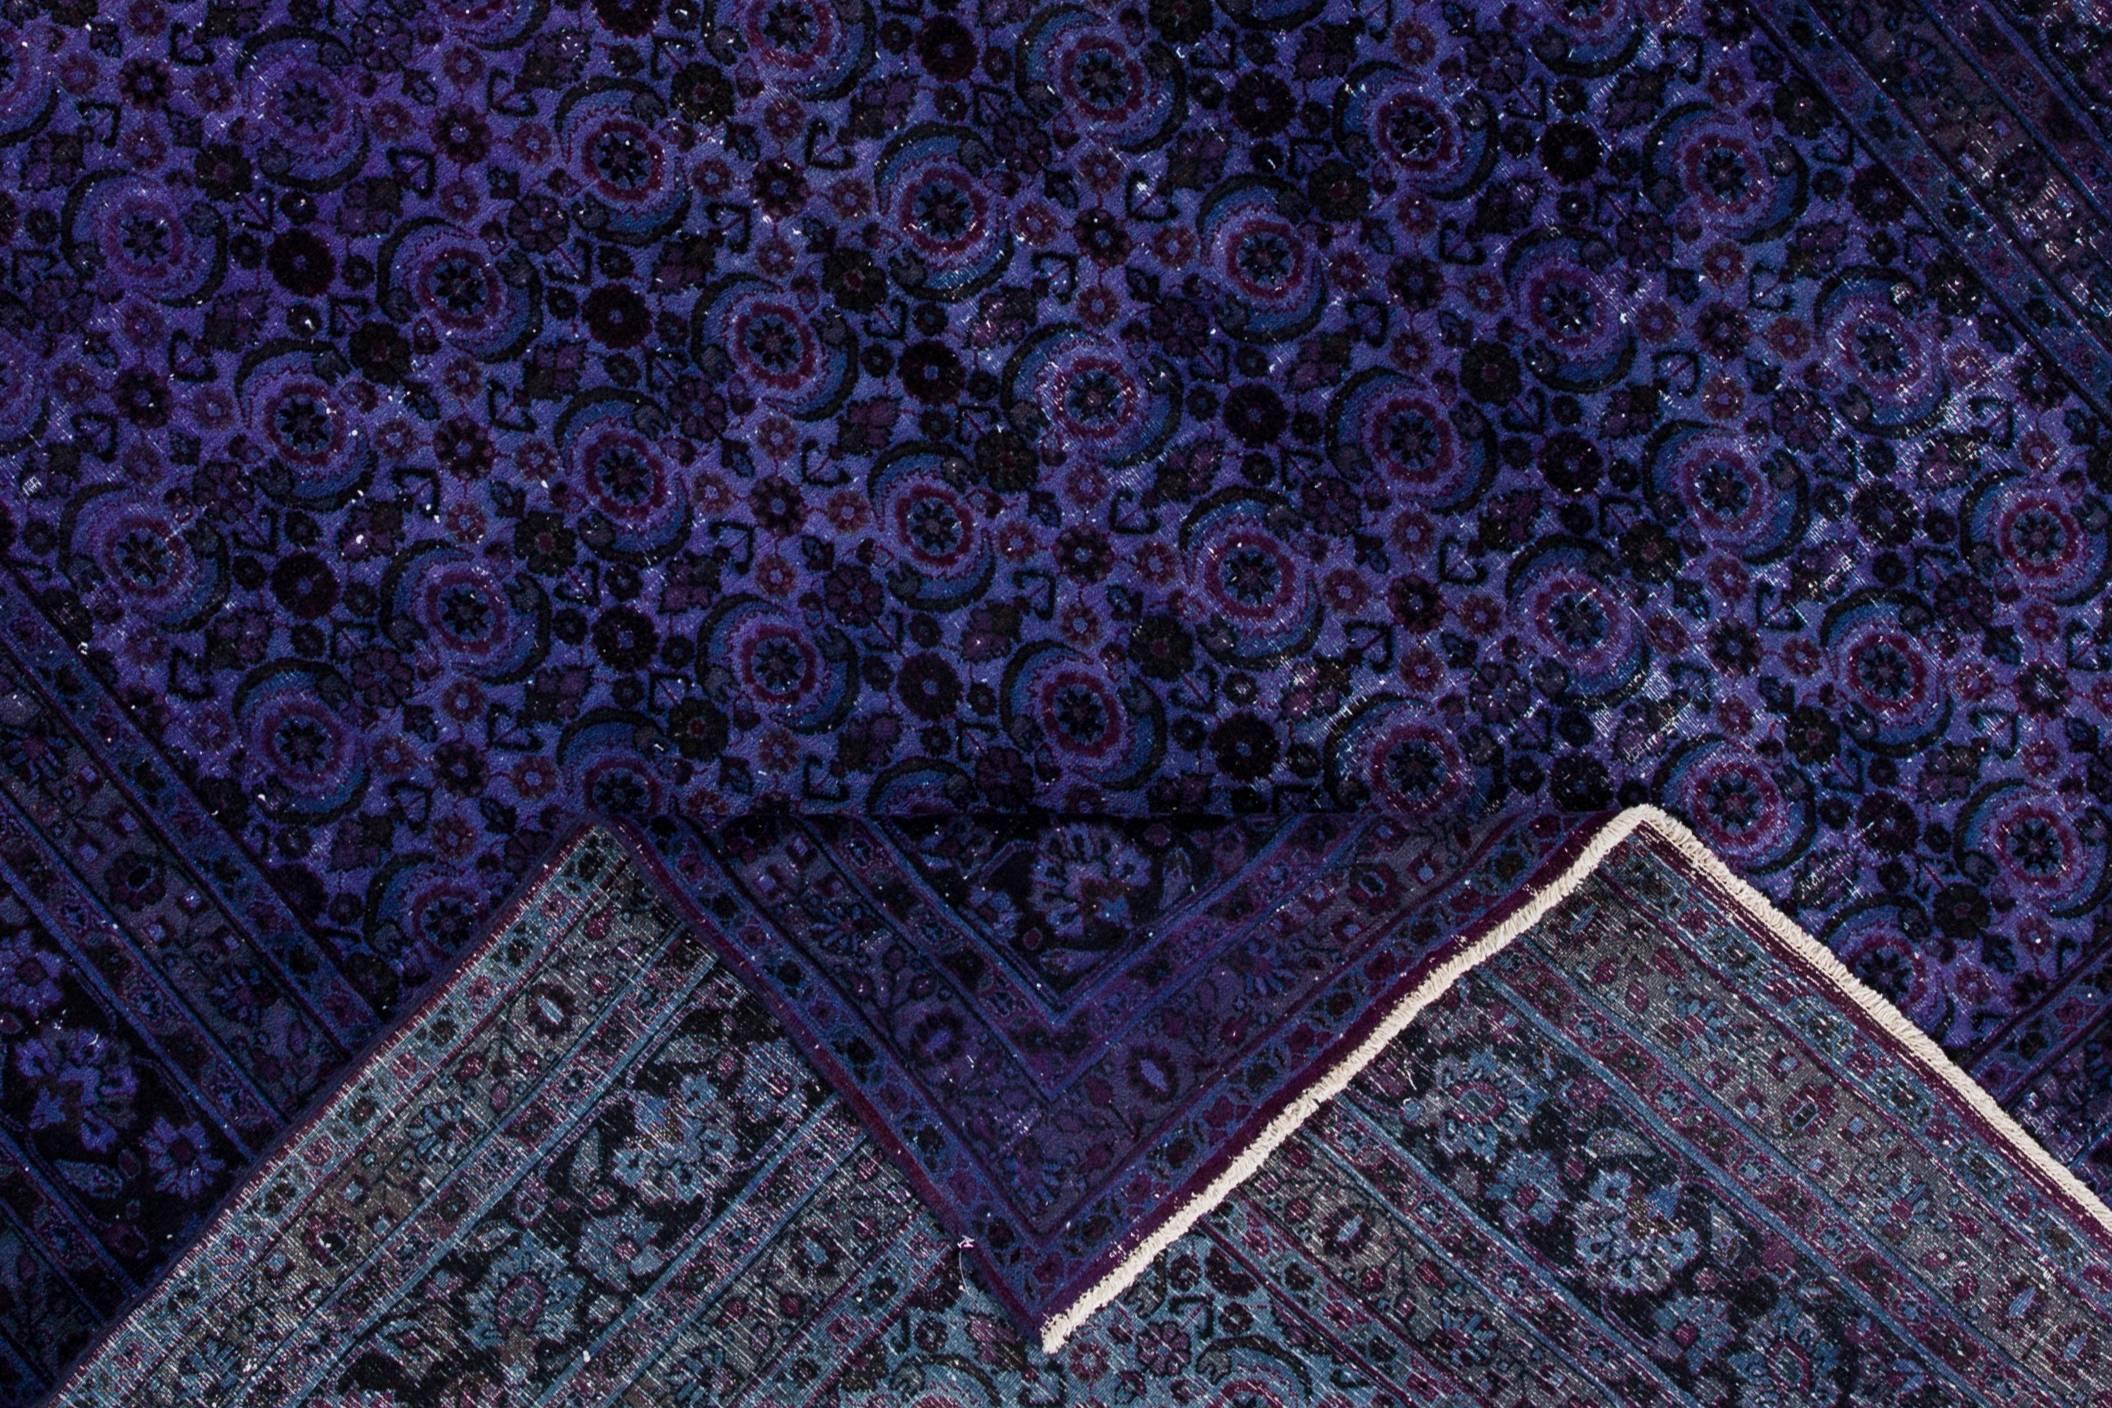 Vintage Persian Tabriz carpet. This piece features a unique, dark purple field with an all-over geometric design. Measures 7.10 x 10.07.